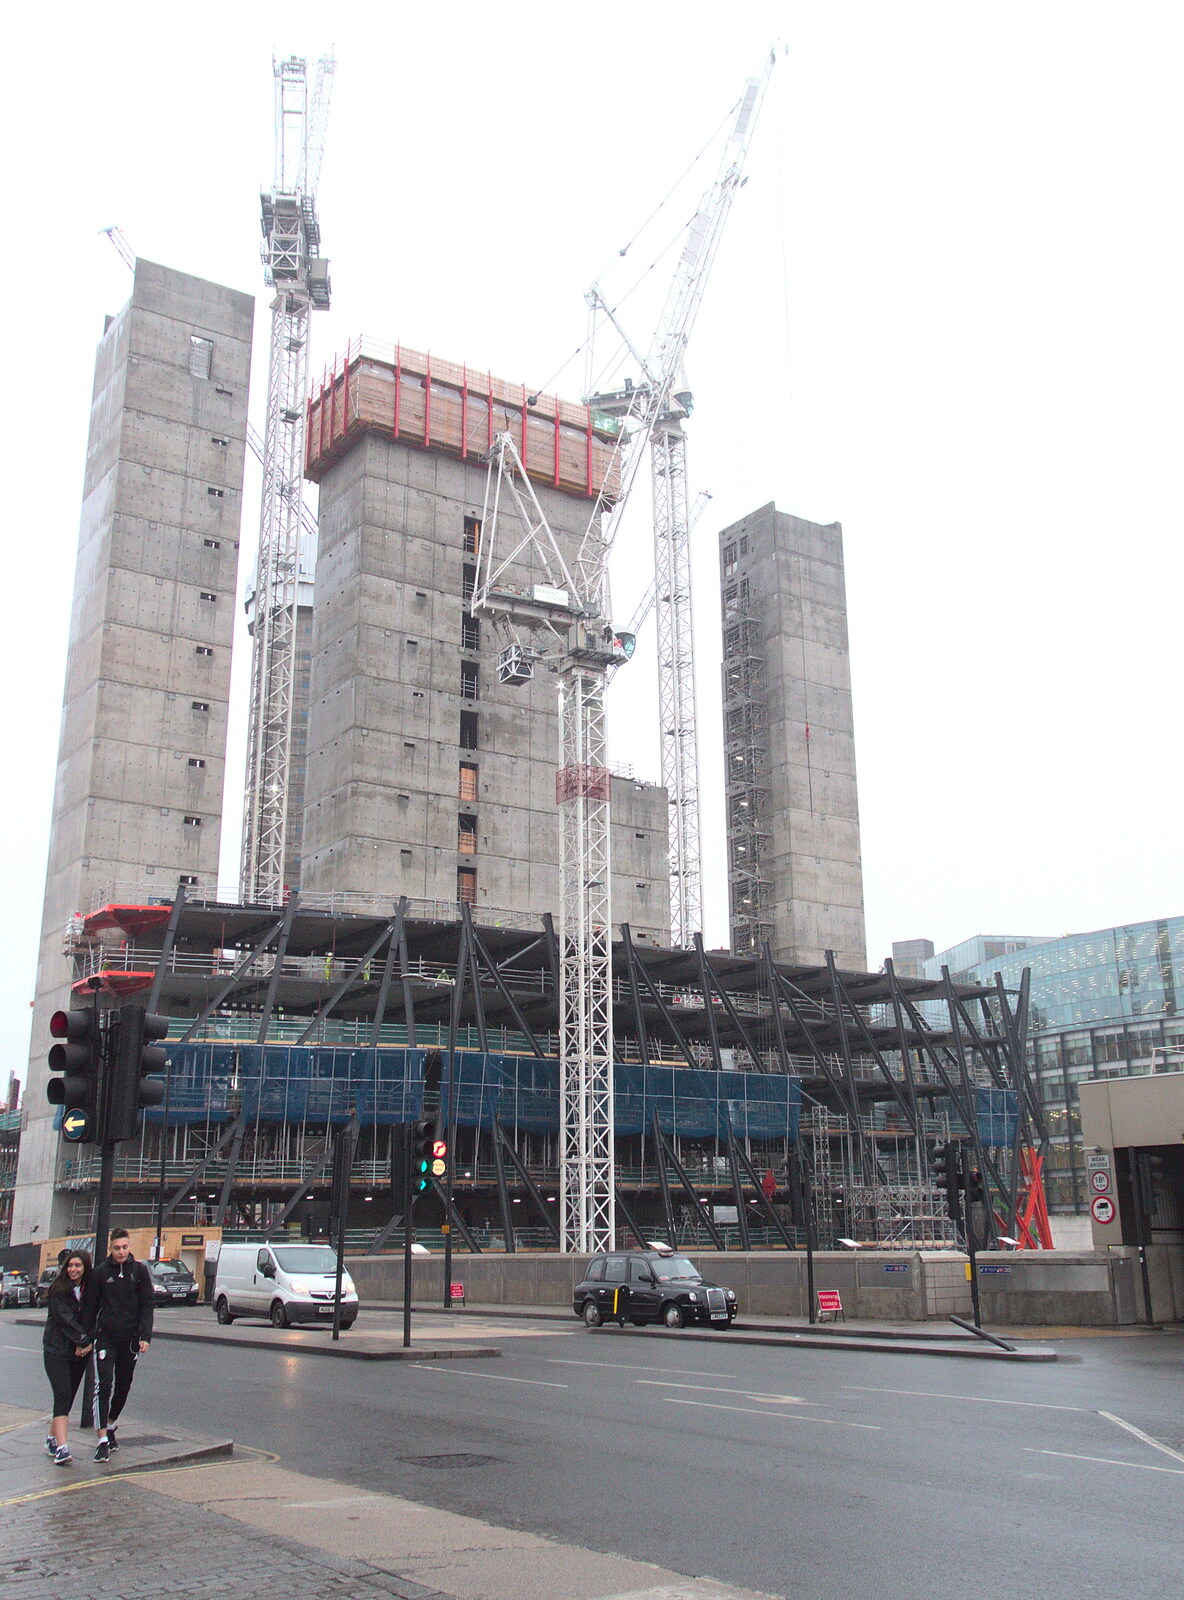 There's more building going on around Paddington Station from A Work Lunch in Nandos, Bayswater Grove, West London - 20th December 2017